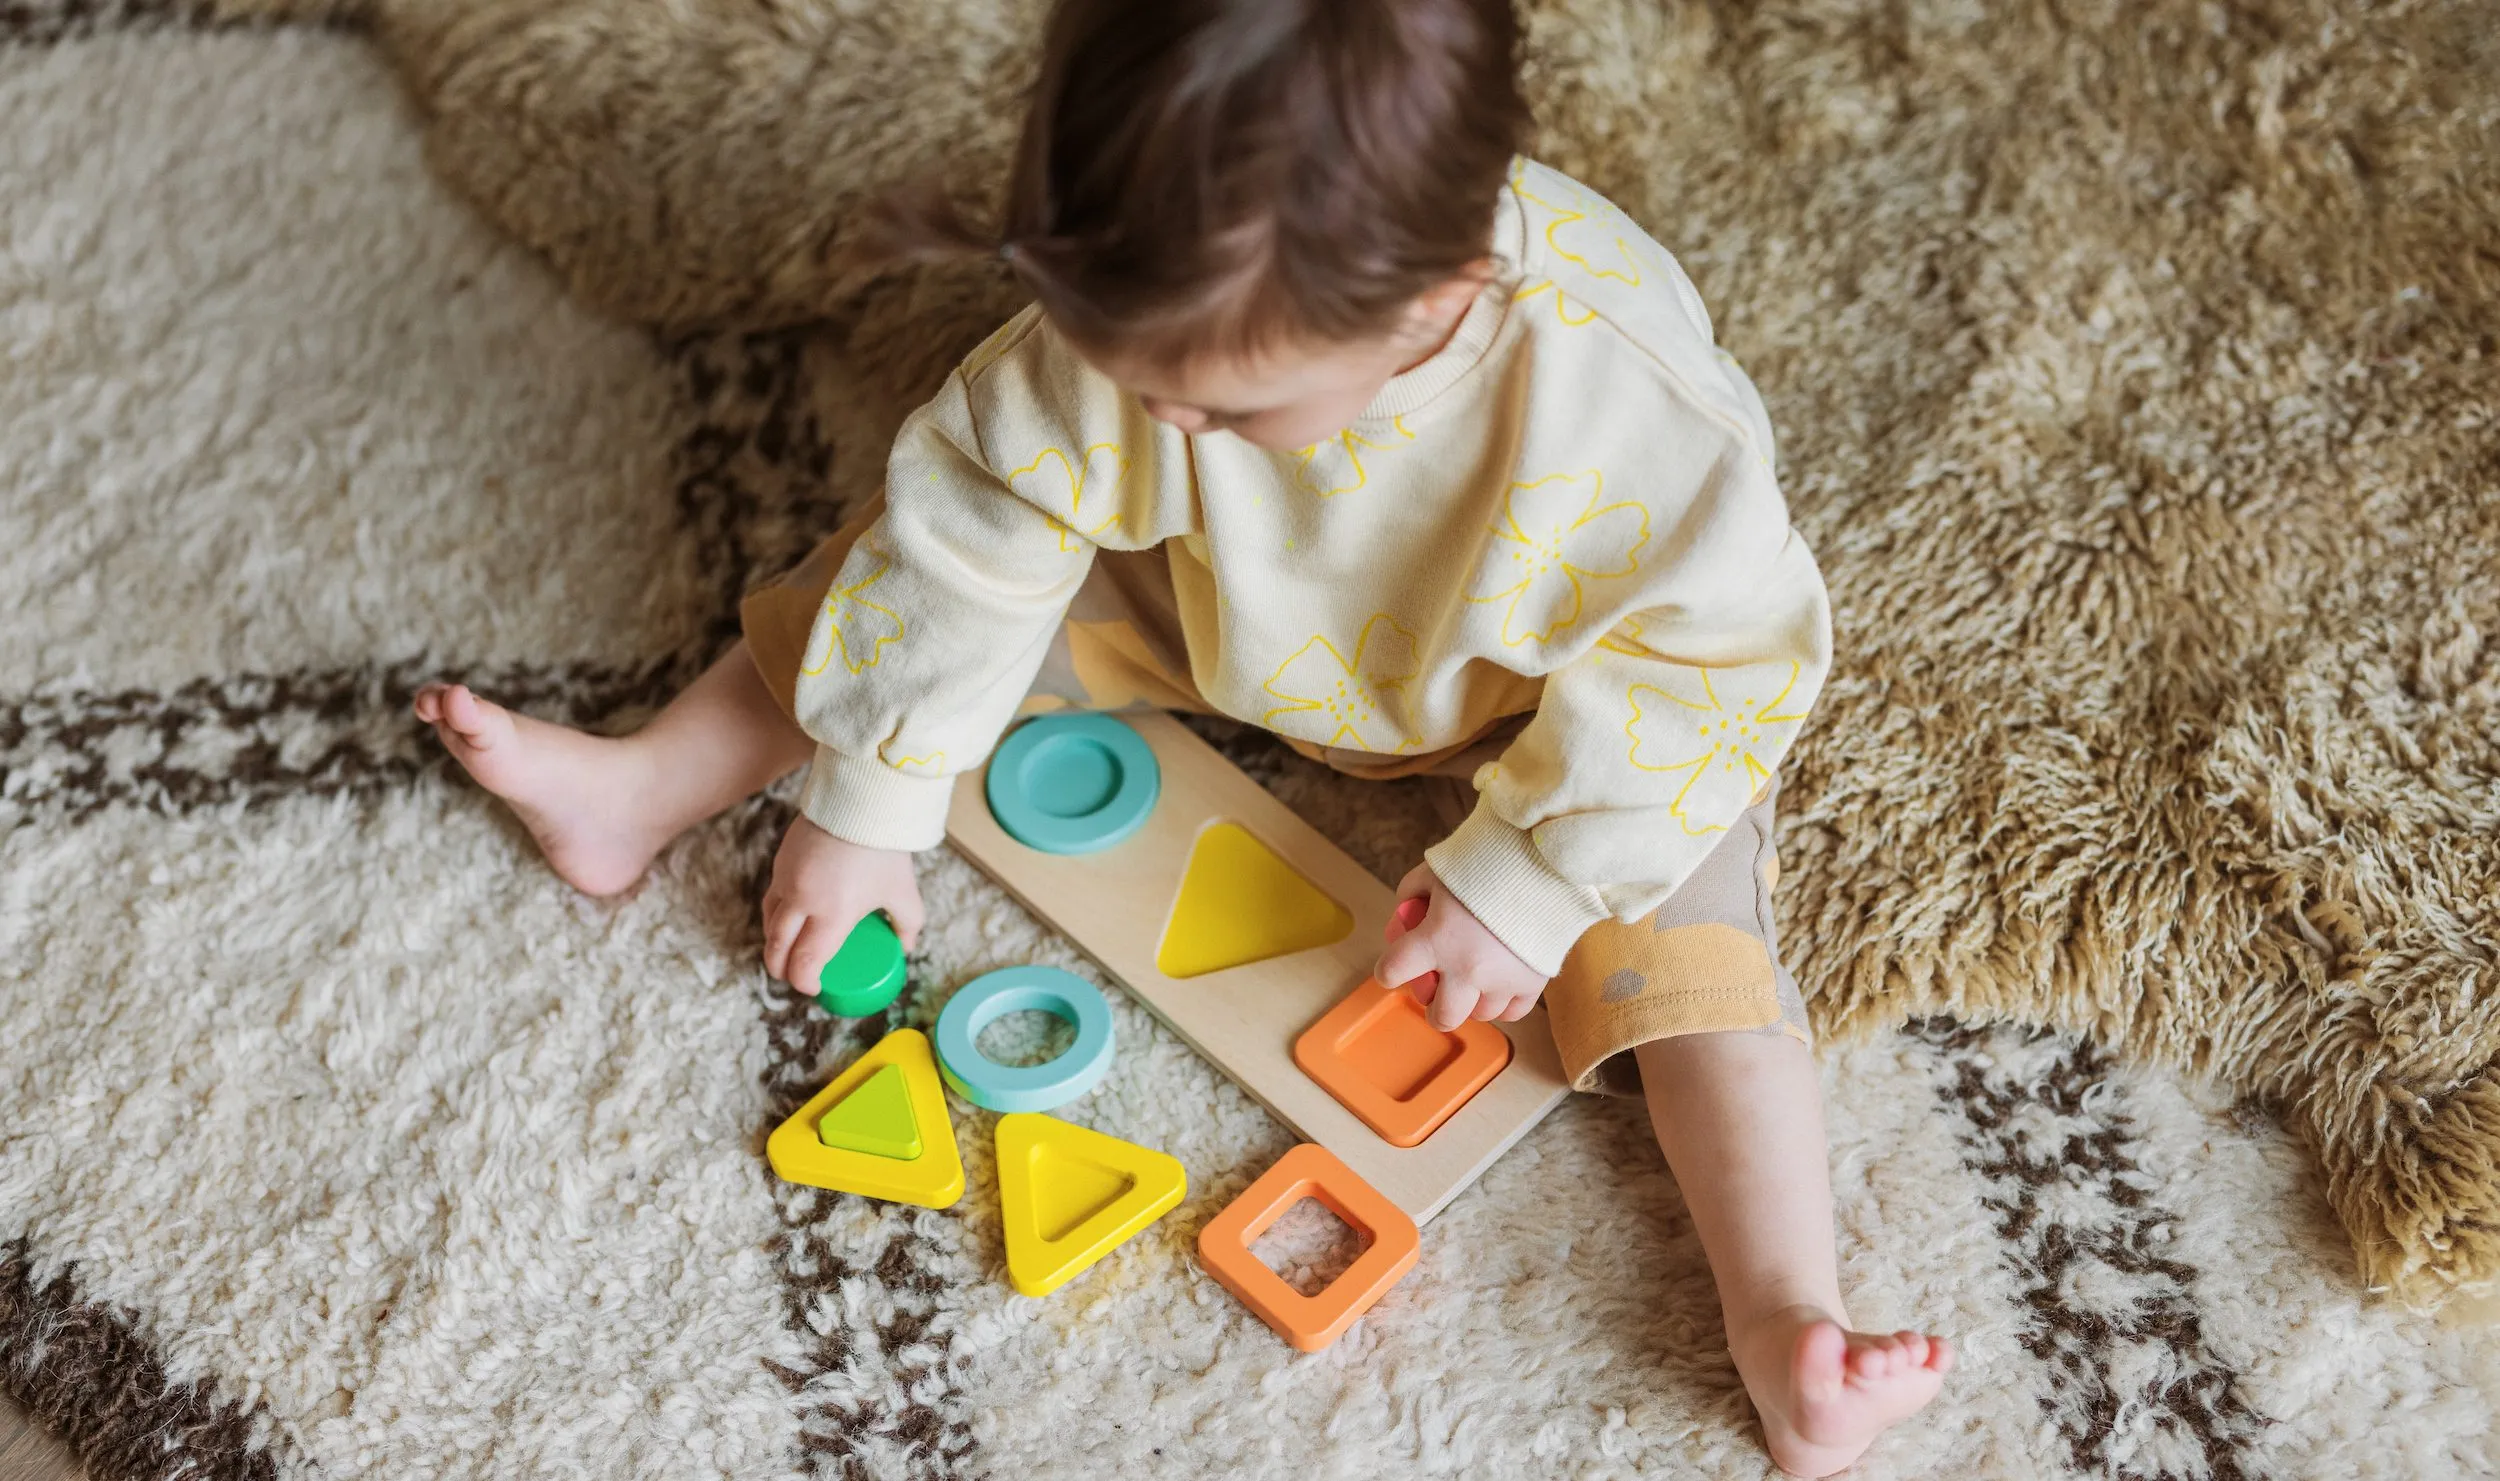 How puzzle progression benefits toddlers | Lovevery